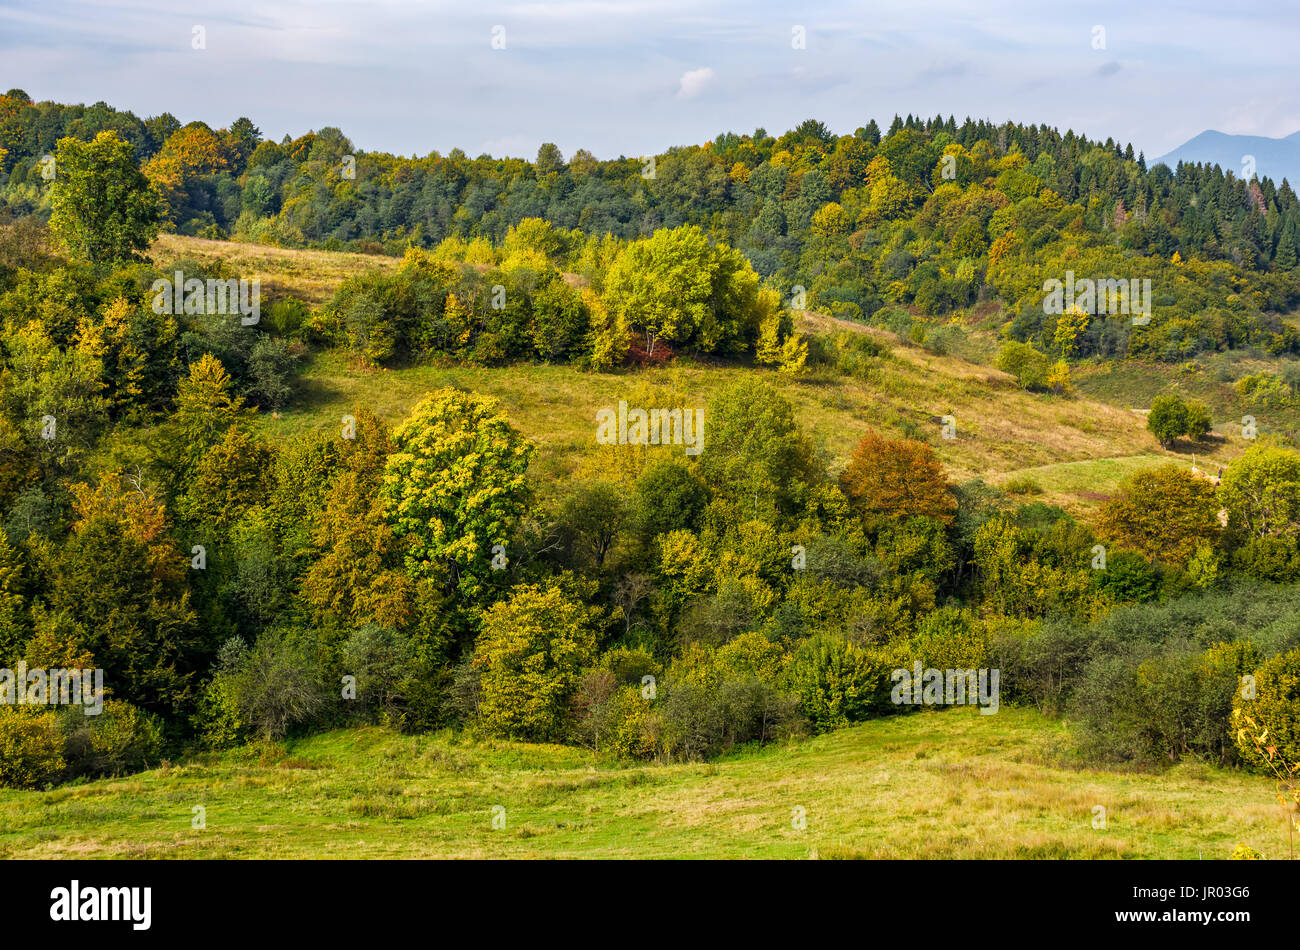 forest with colorful foliage on hills in mountainous countryside. lovely early autumn mountain landscape Stock Photo